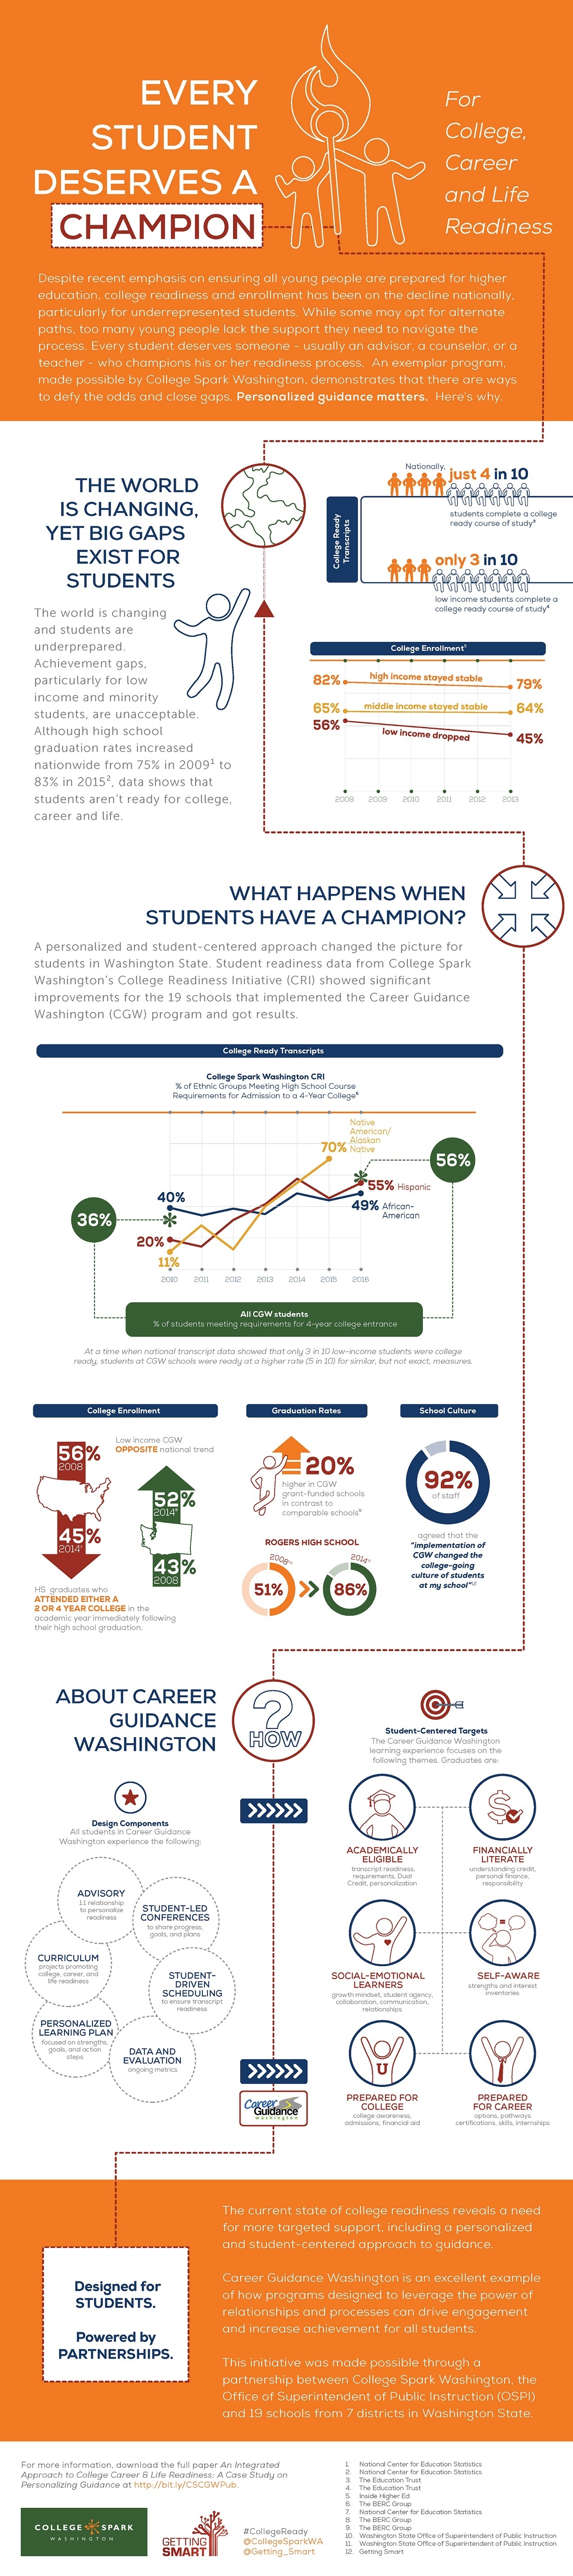 Every Student Deserves a Champion for College, Career and Life Readiness Infographic